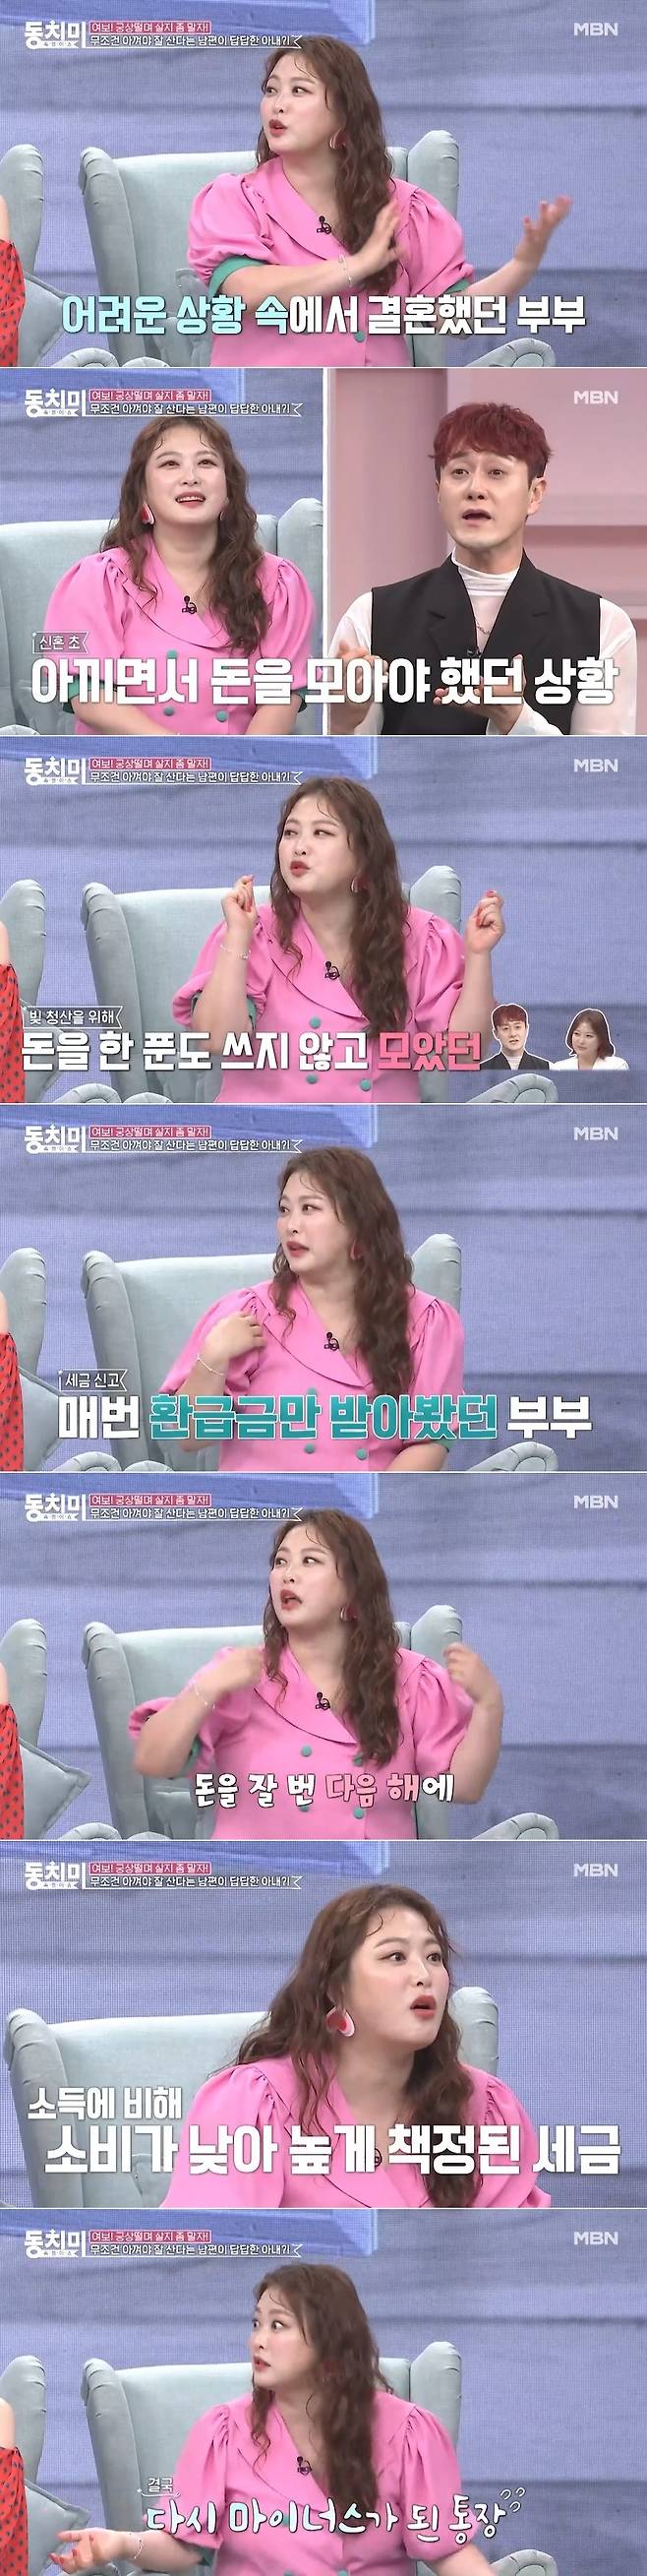 Sim Jin-hwa reveals experience of being hit by Tax bombSim Jin-hwa Wonhyo Kim, who appeared on MBN s Dongchimi broadcast on June 19, talked about the theme of I live well and save well.On the day, Sim Jin-hwa said, I remember my body because I have lived my whole life no matter how much I want to change my consciousness.Sim Jin-hwa then said, It was difficult at the time of honeymoon because I first marriage. So Wonhyo Kim also said, In the early days of marriage, there was no money.I collected money, but when I collected it, I went out to another place. 